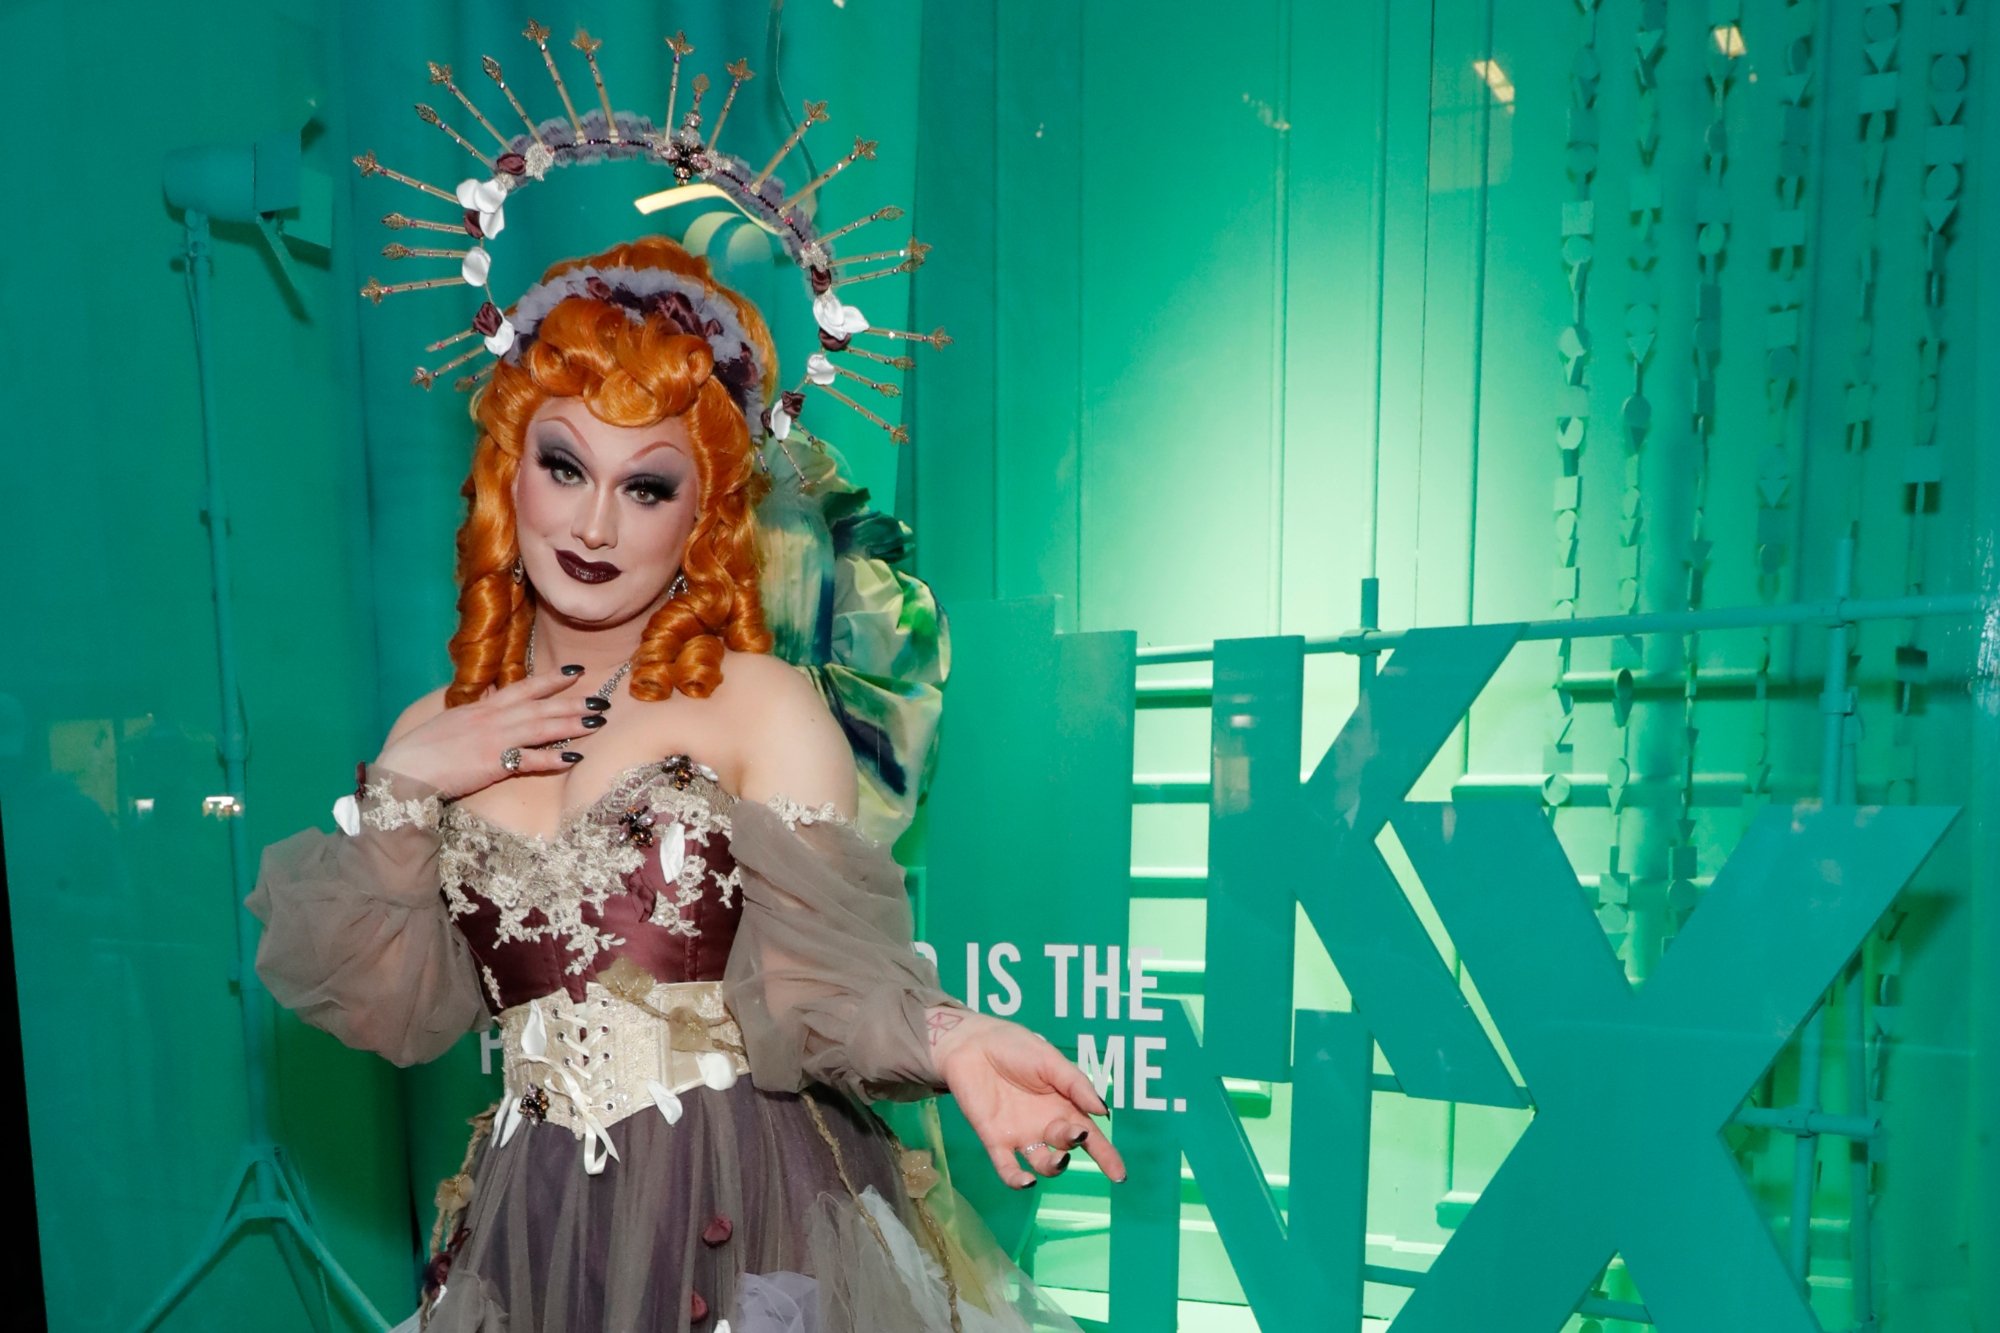 'RuPaul's Drag Race' winner Jinkx Monsoon. They're wearing a fantastical dress with a headpiece in front of a green background.